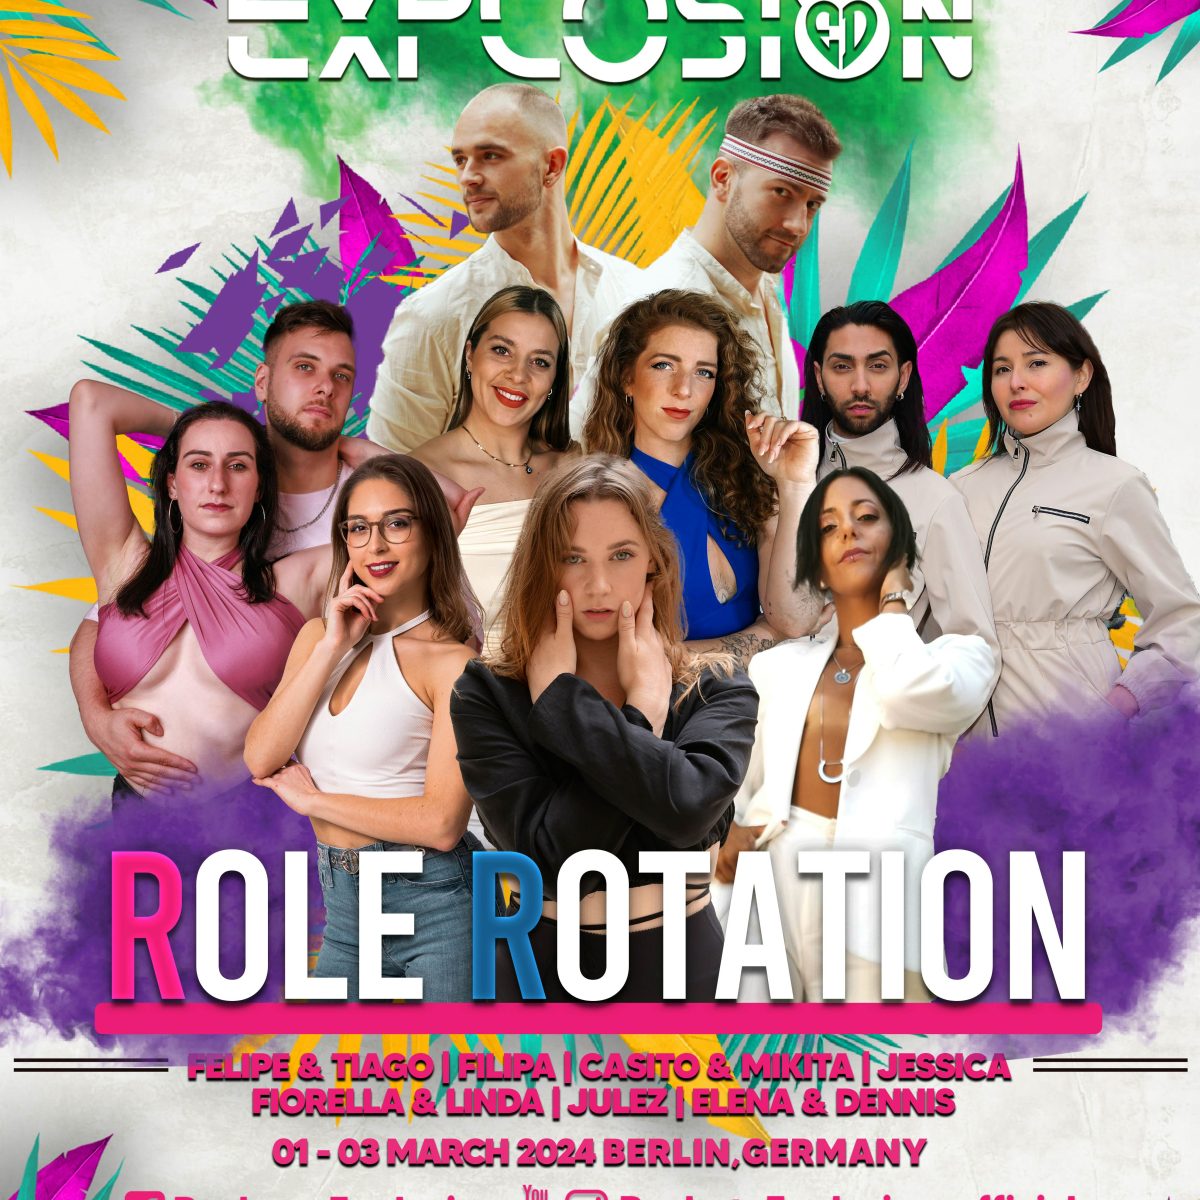 Rolerotation Bachata Explosion Berlin: Breaking Gender Norms and Creating New Dance Horizons